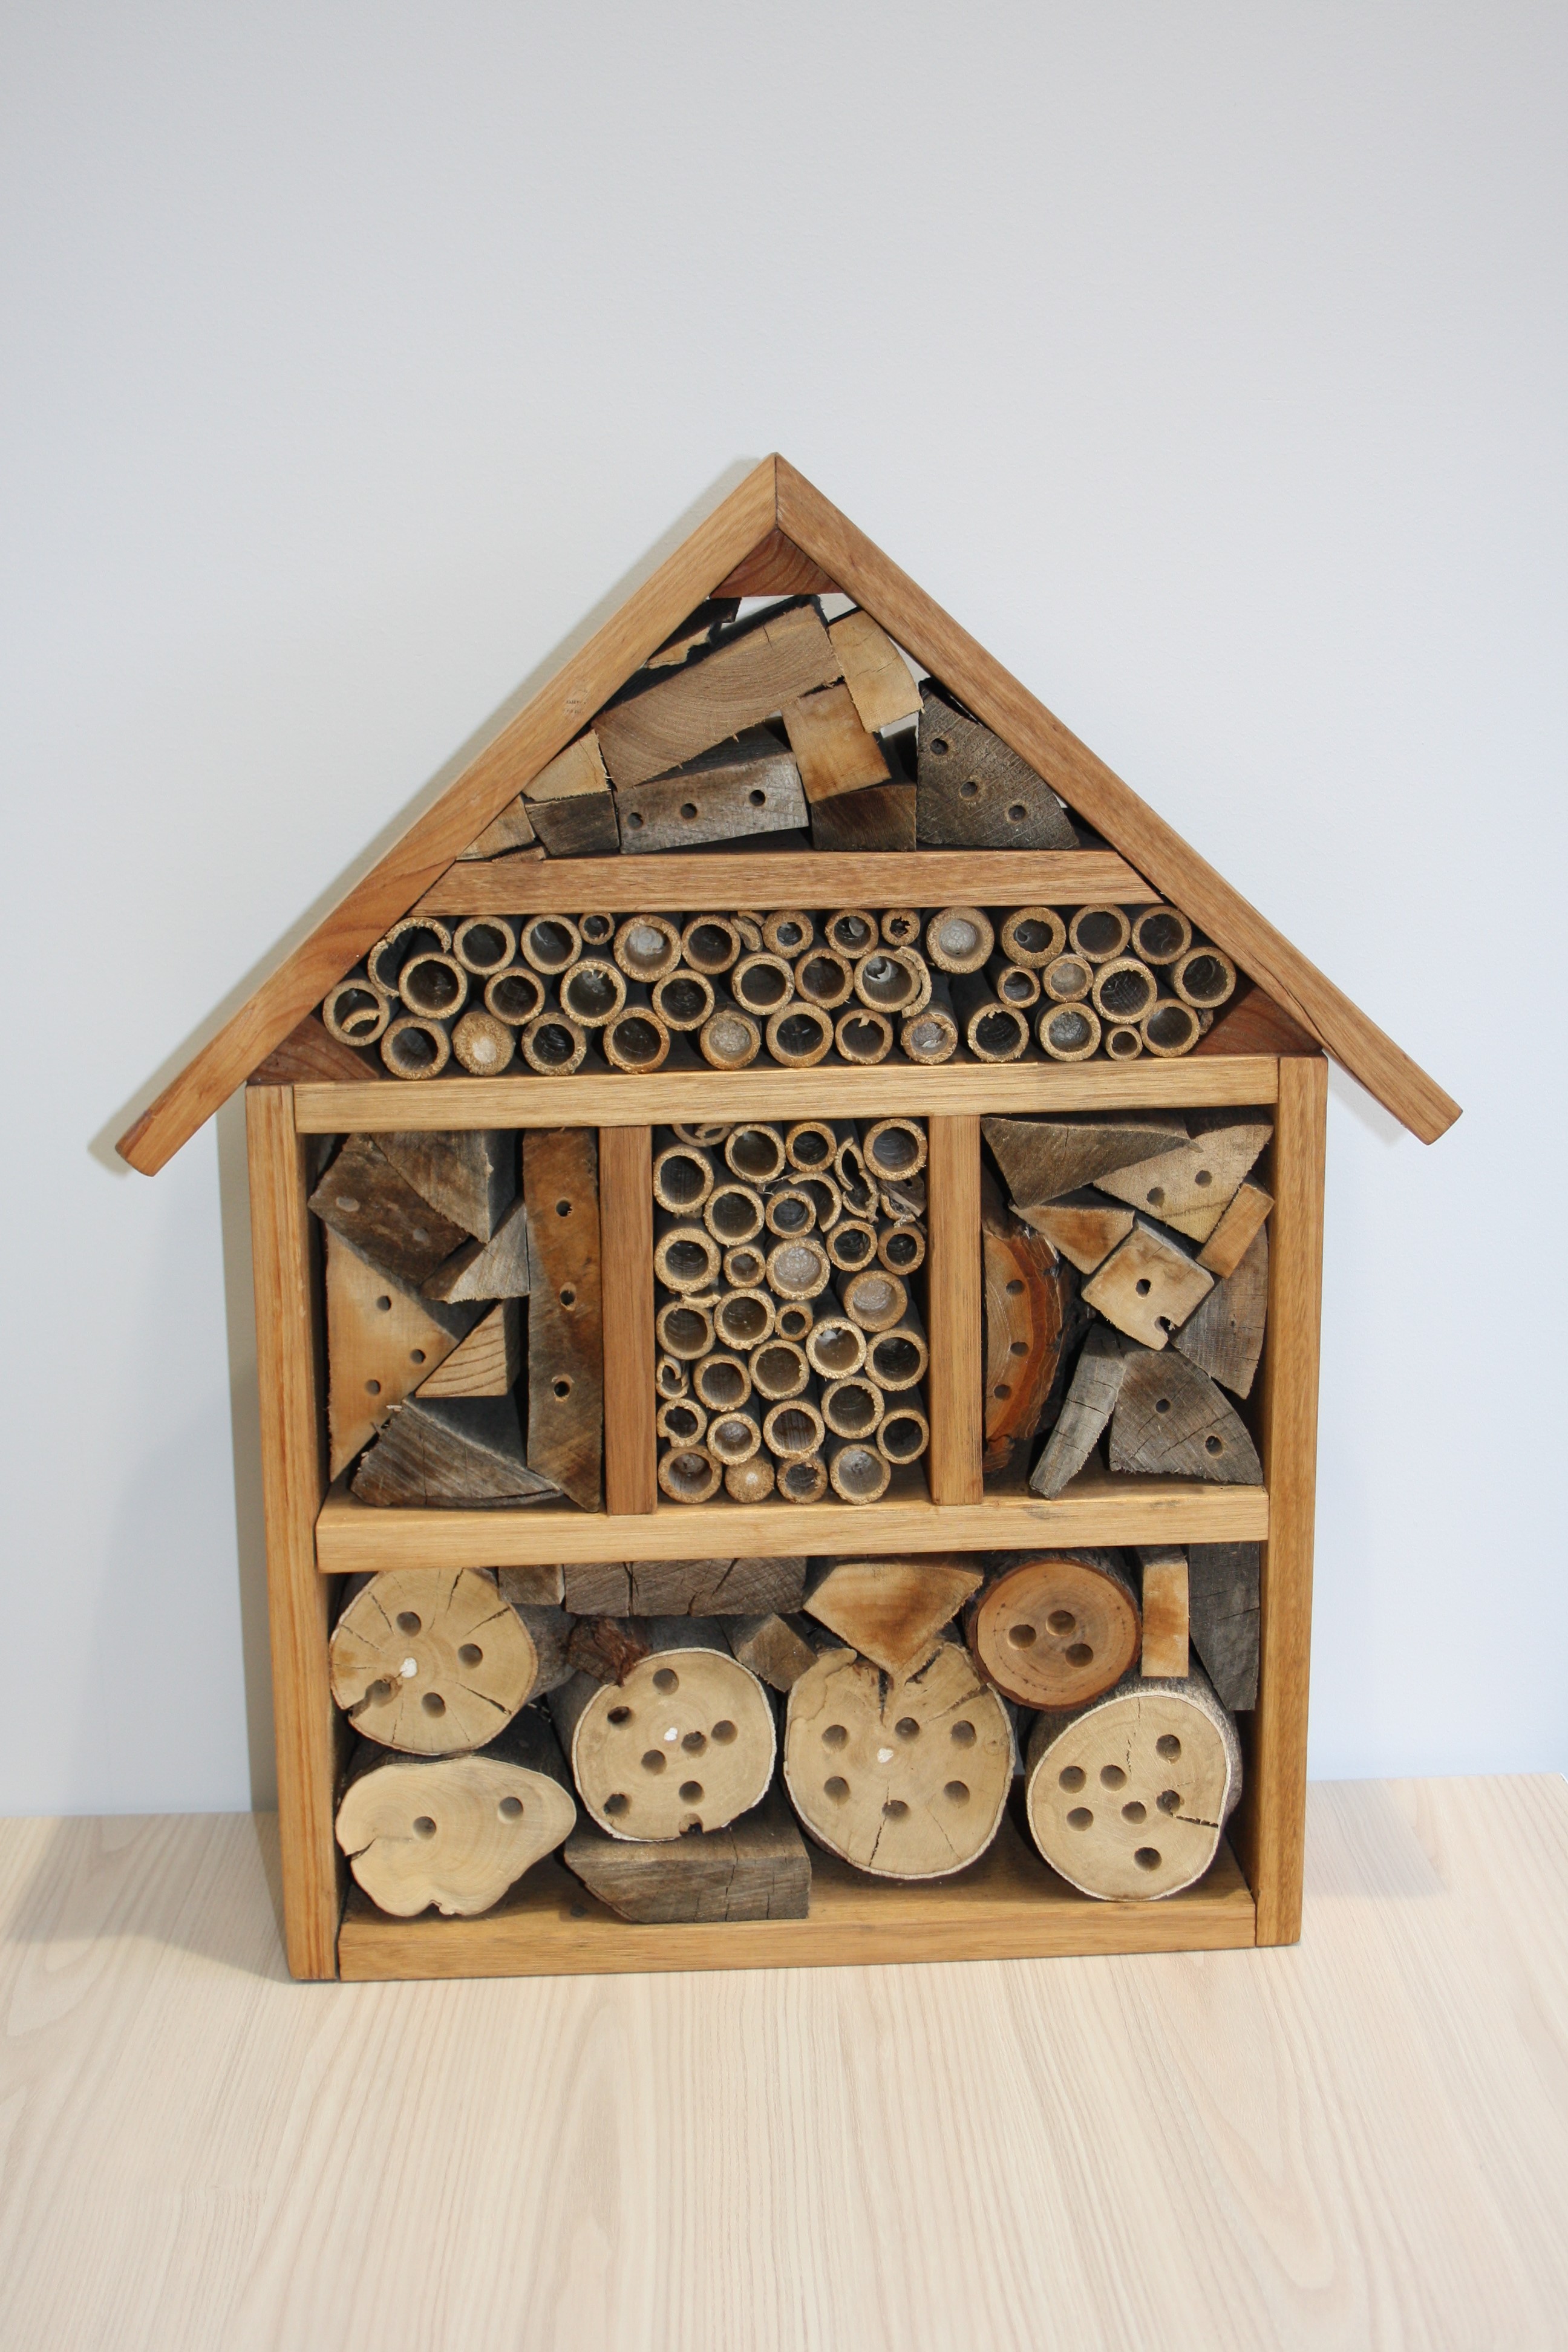 An insect house made up of different materials such as wood, bamboo, and recycled materials